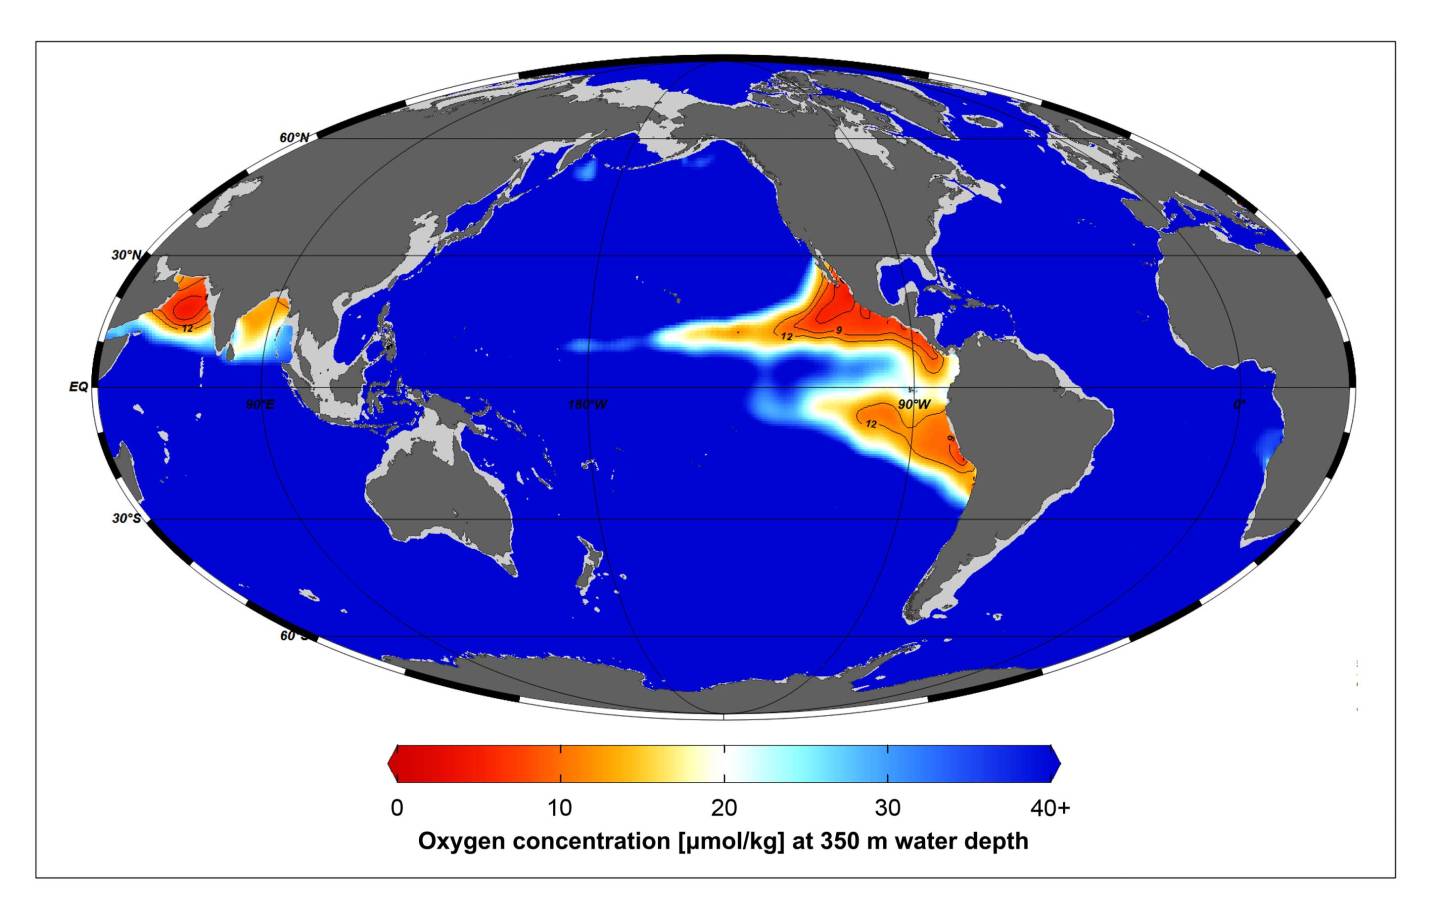 red areas on the map show unoxygenated waters off the west coasts of North and South America